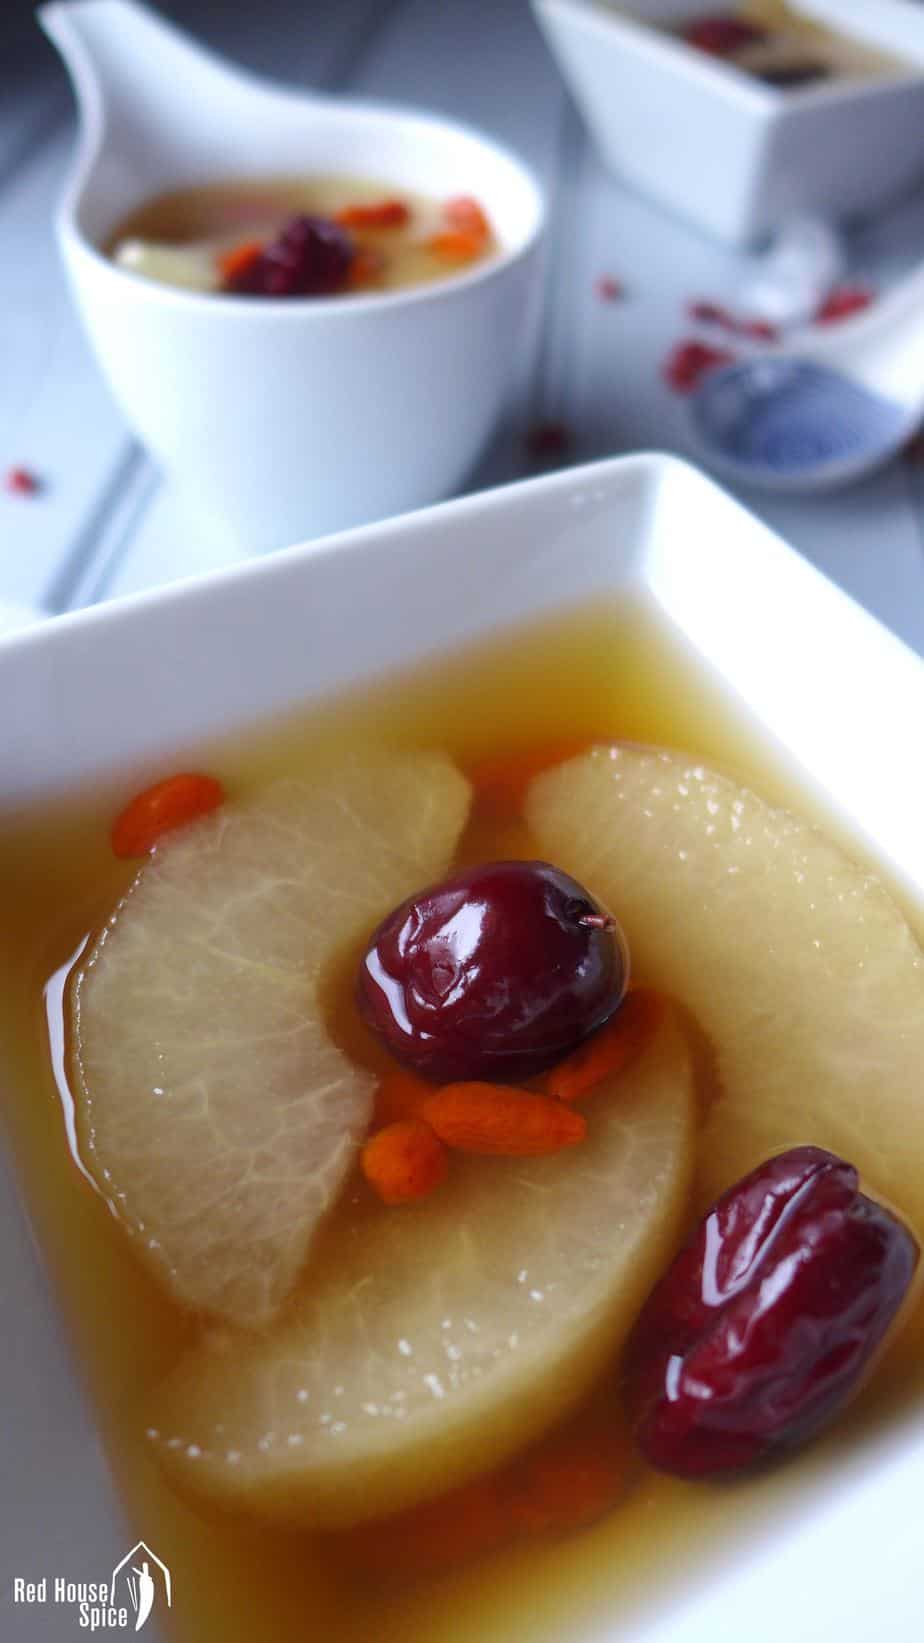 Boiled pear slices in a sugary syrup.